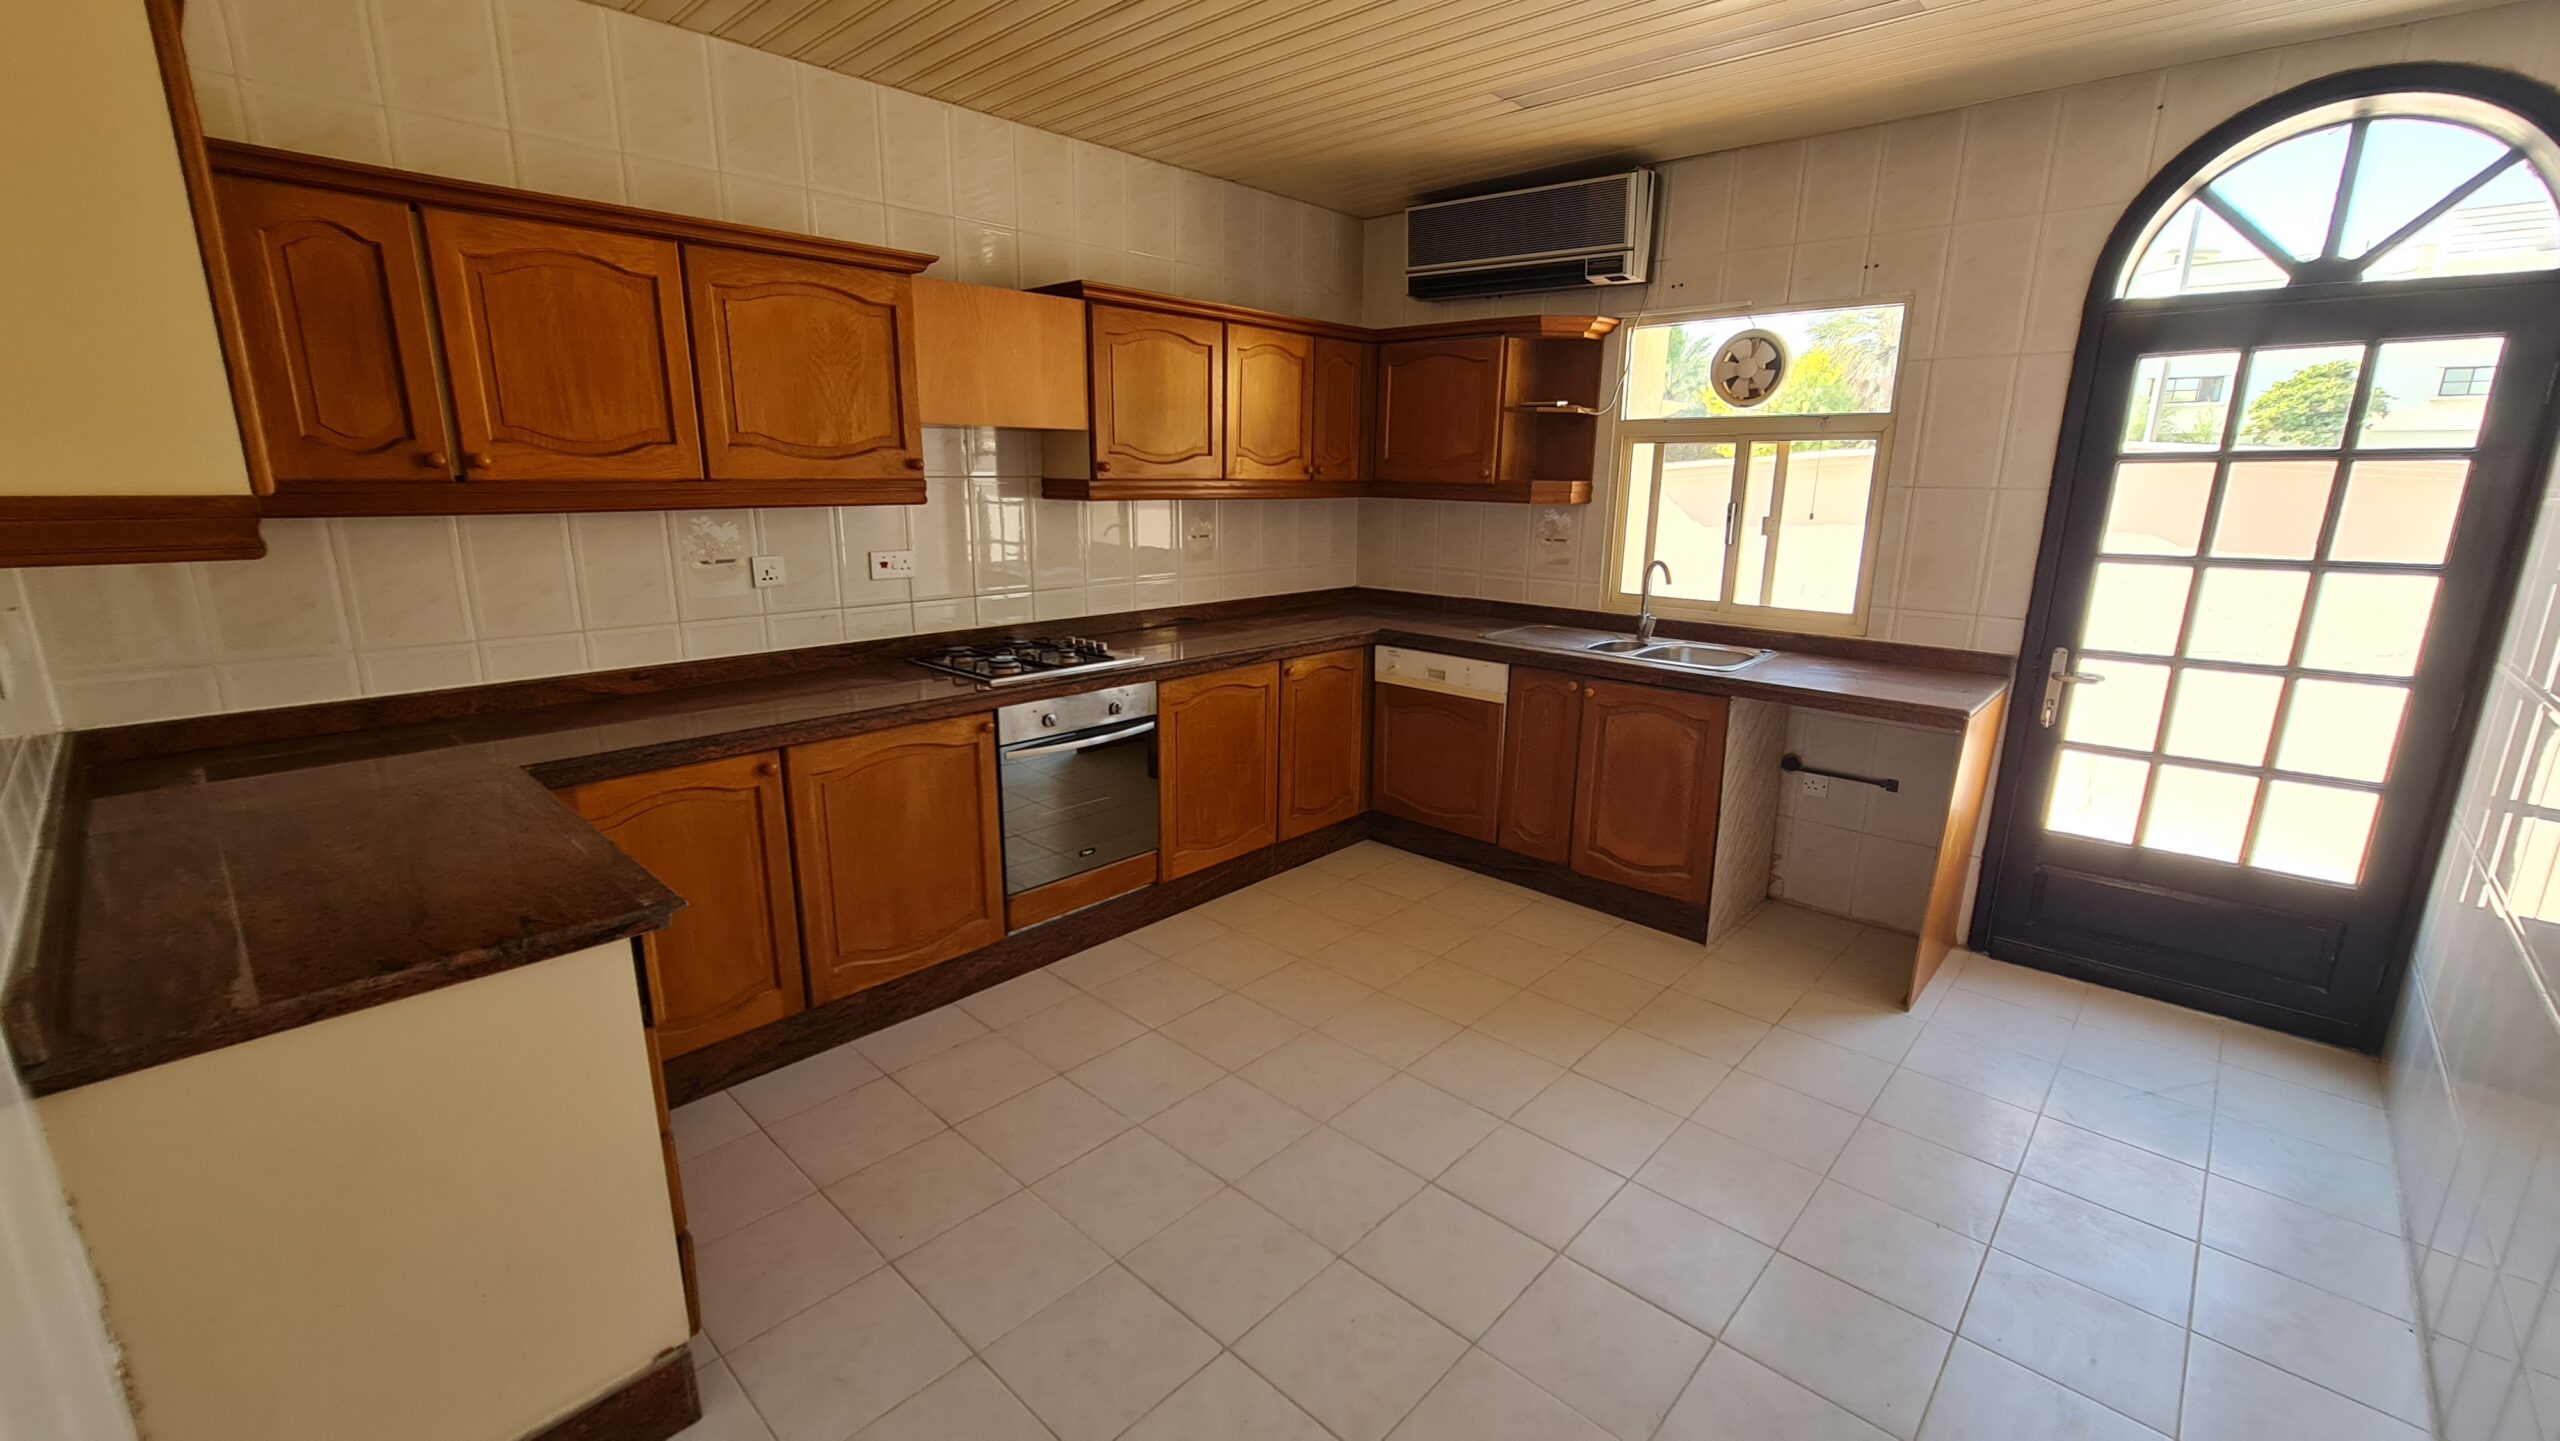 Villa for rent with 3 bedrooms, semi-furnished, located in Bu Ashira